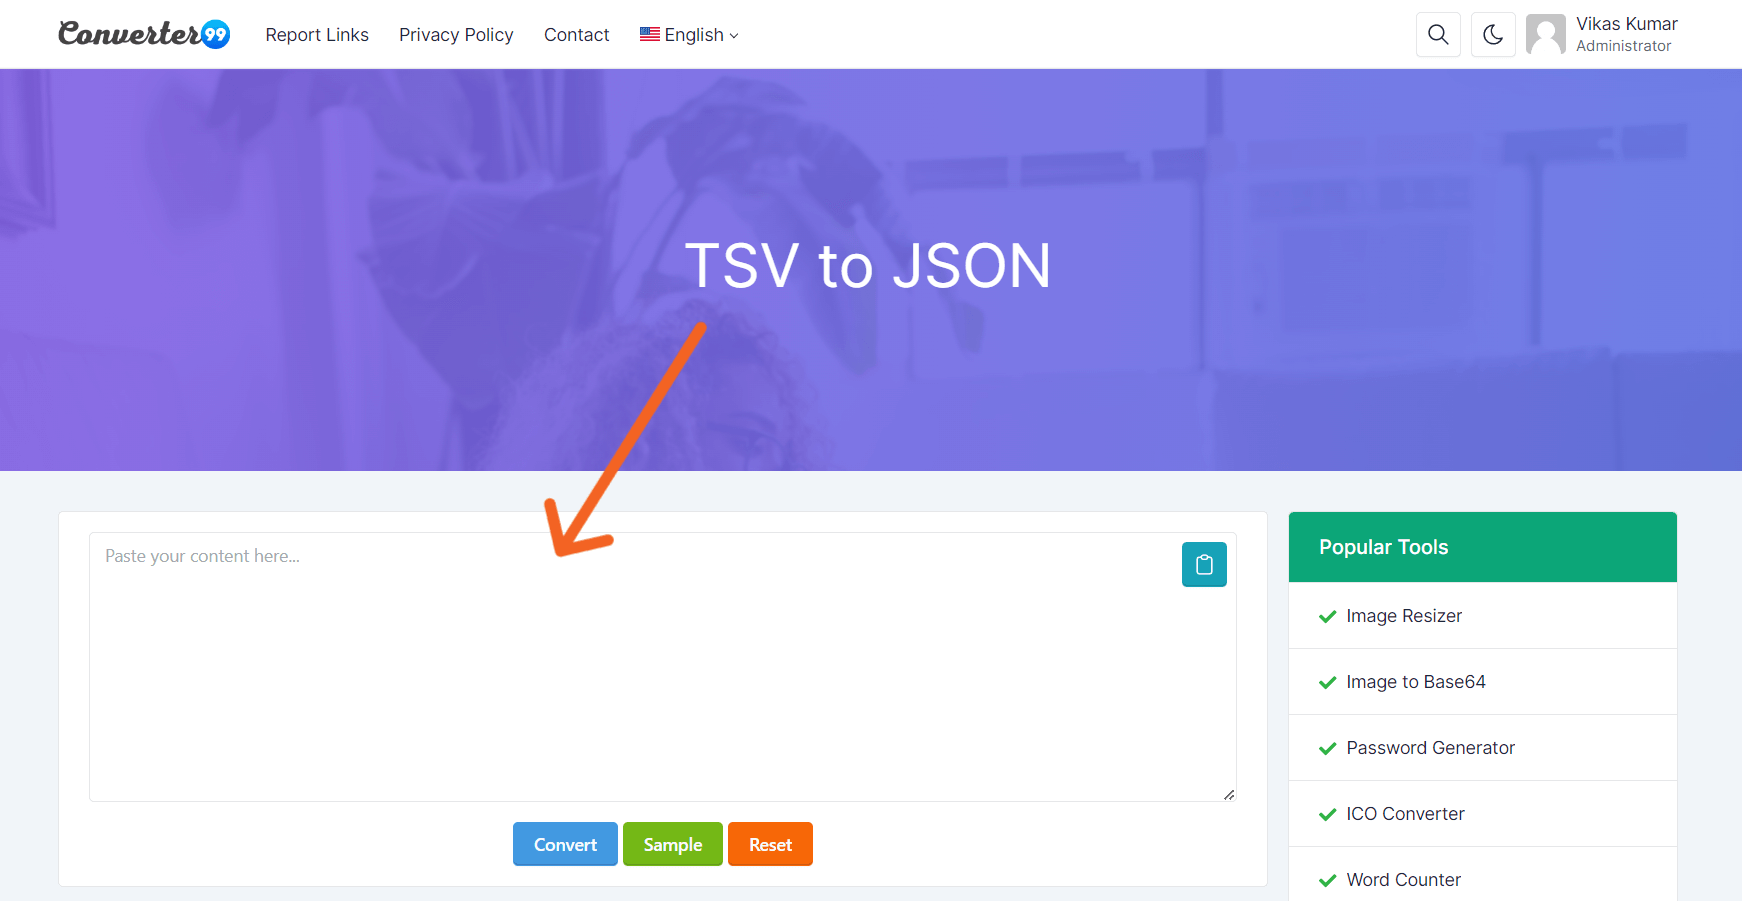 tsv-to-json